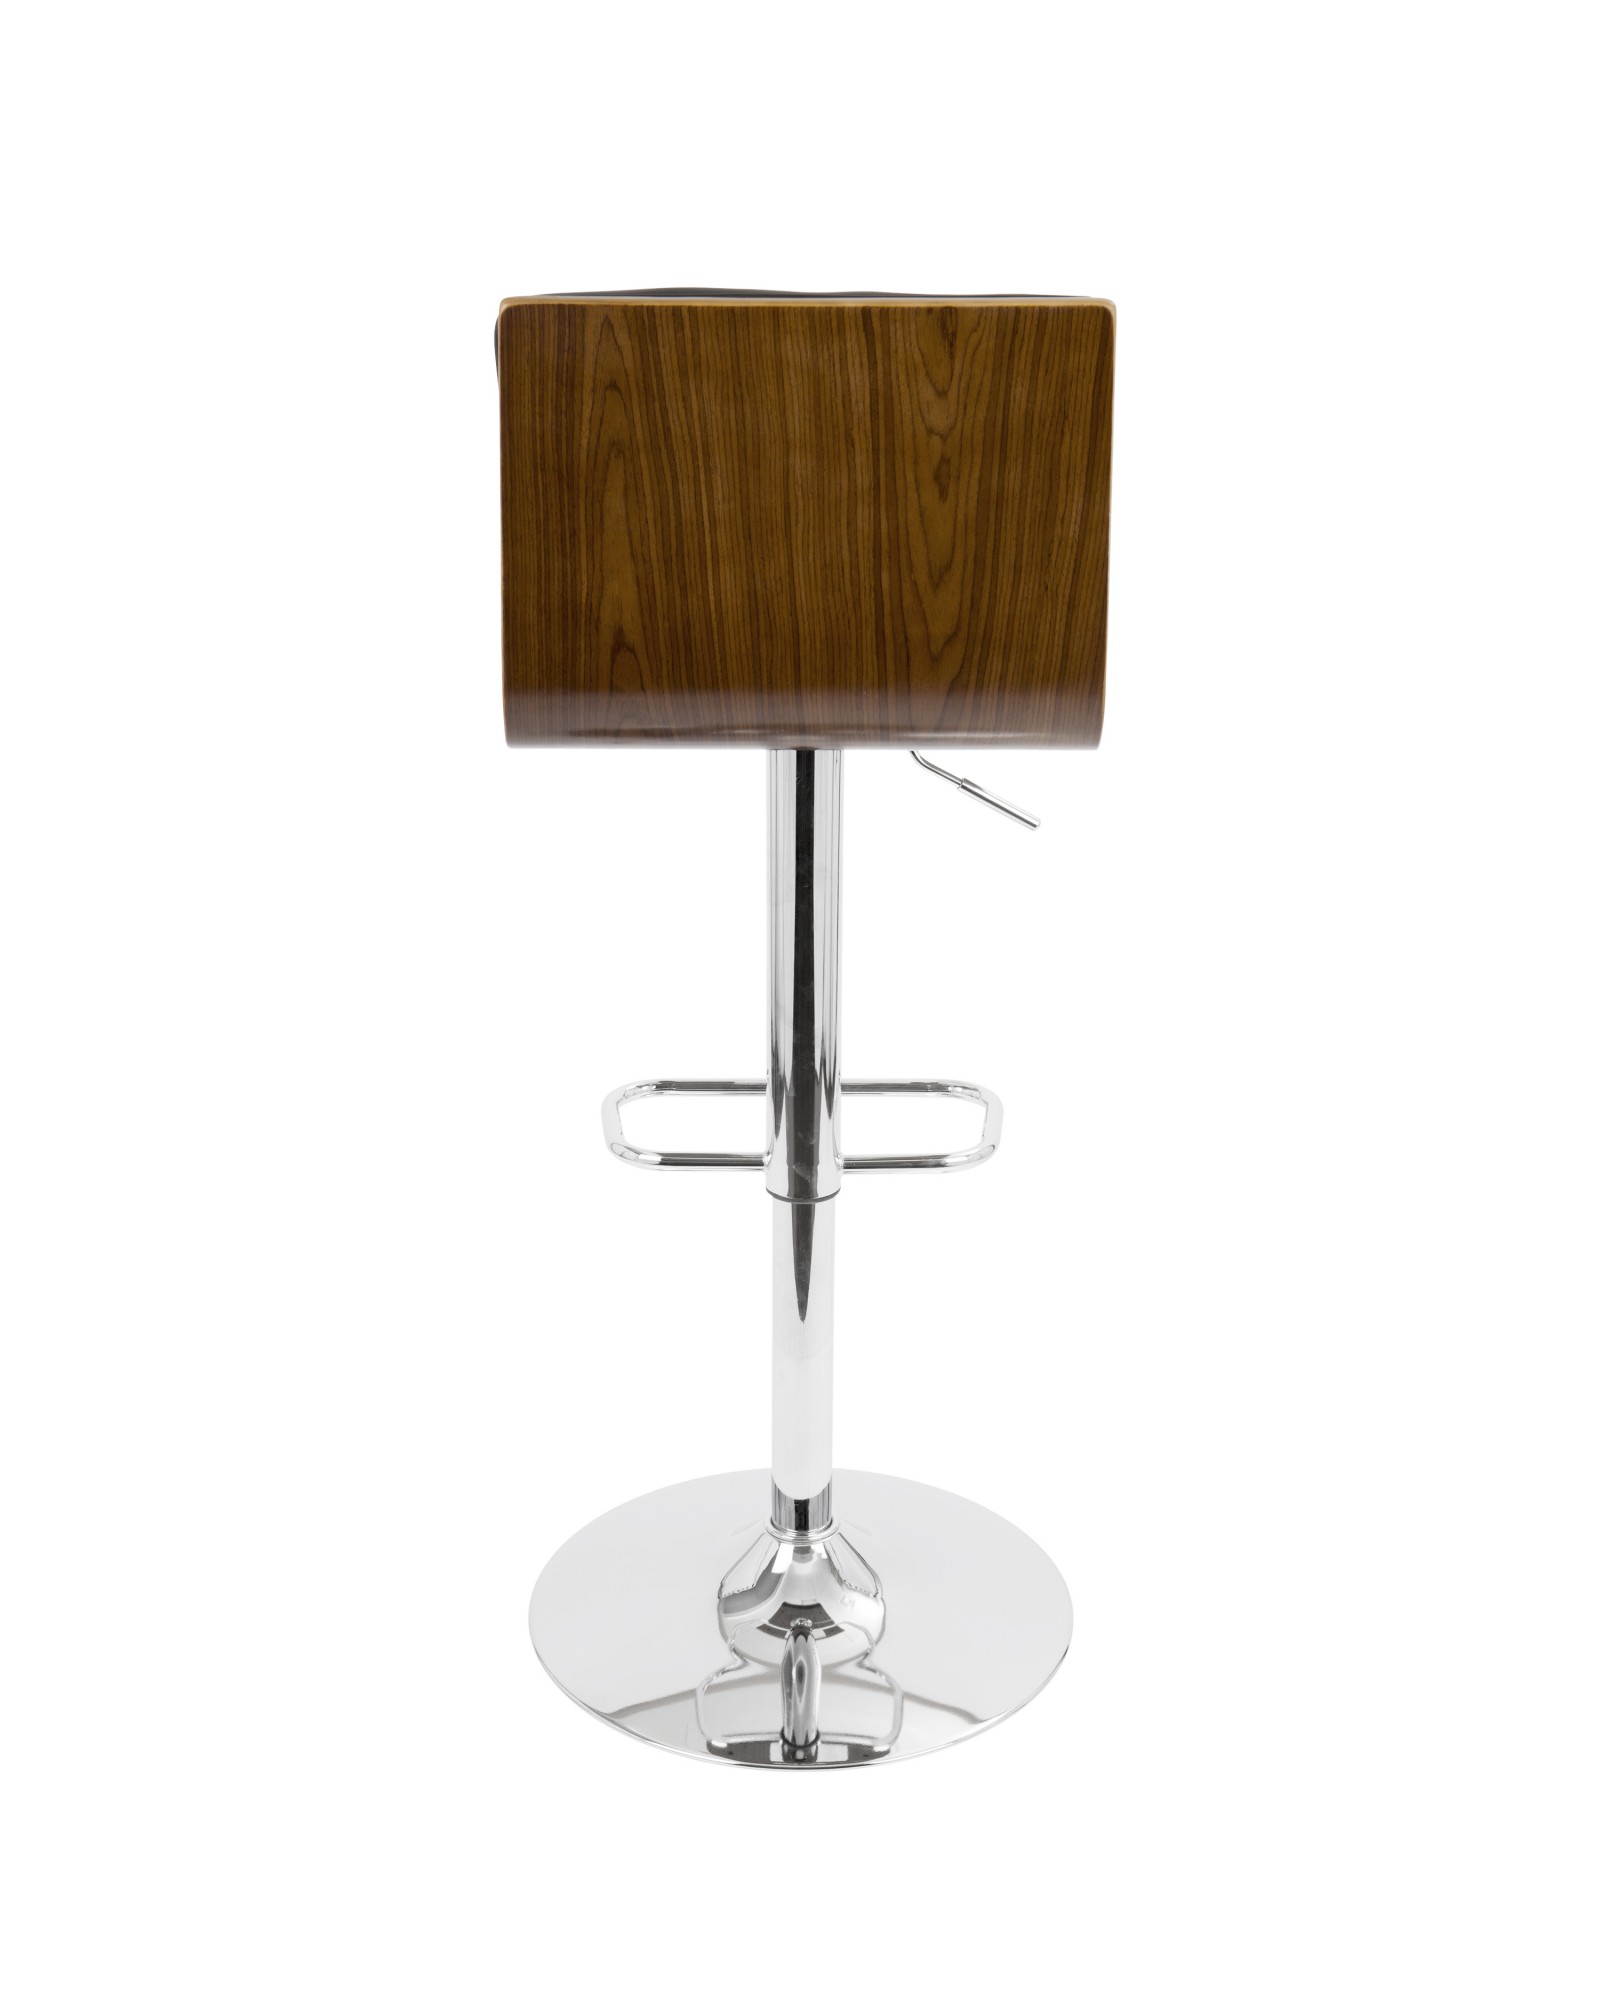 Vasari Mid-Century Modern Adjustable Barstool with Swivel in Walnut and Black Faux Leather